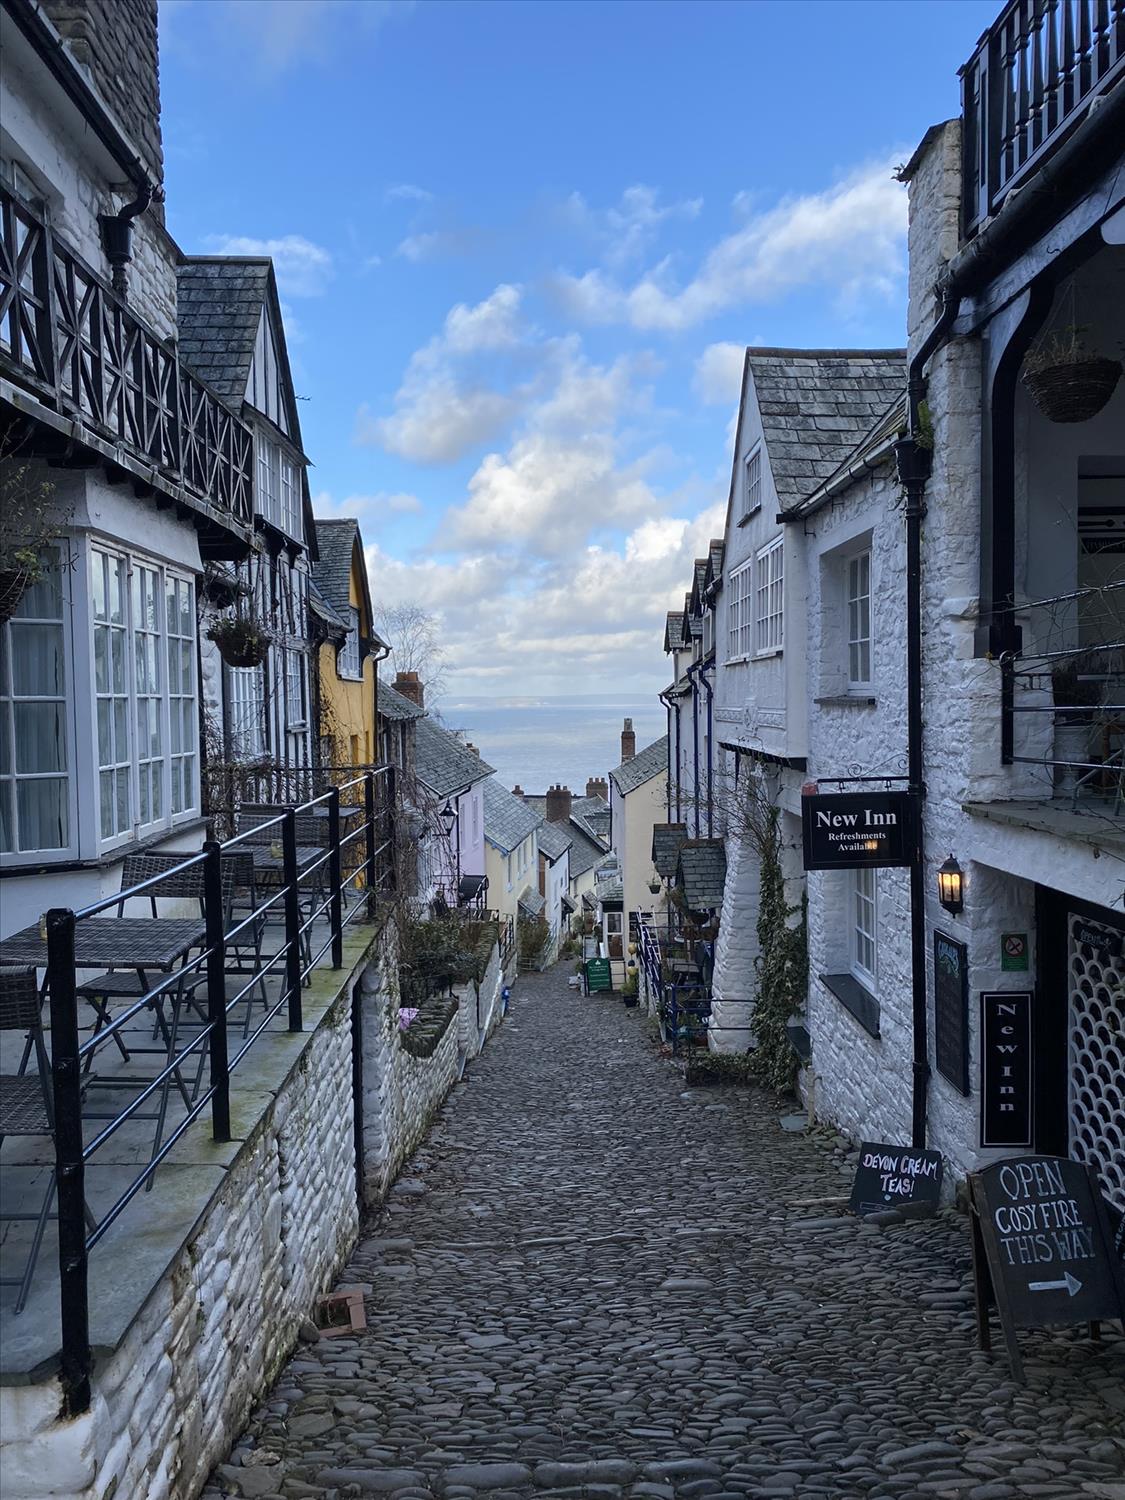 Clovelly best day trip from Polrunny Farm holiday cottages